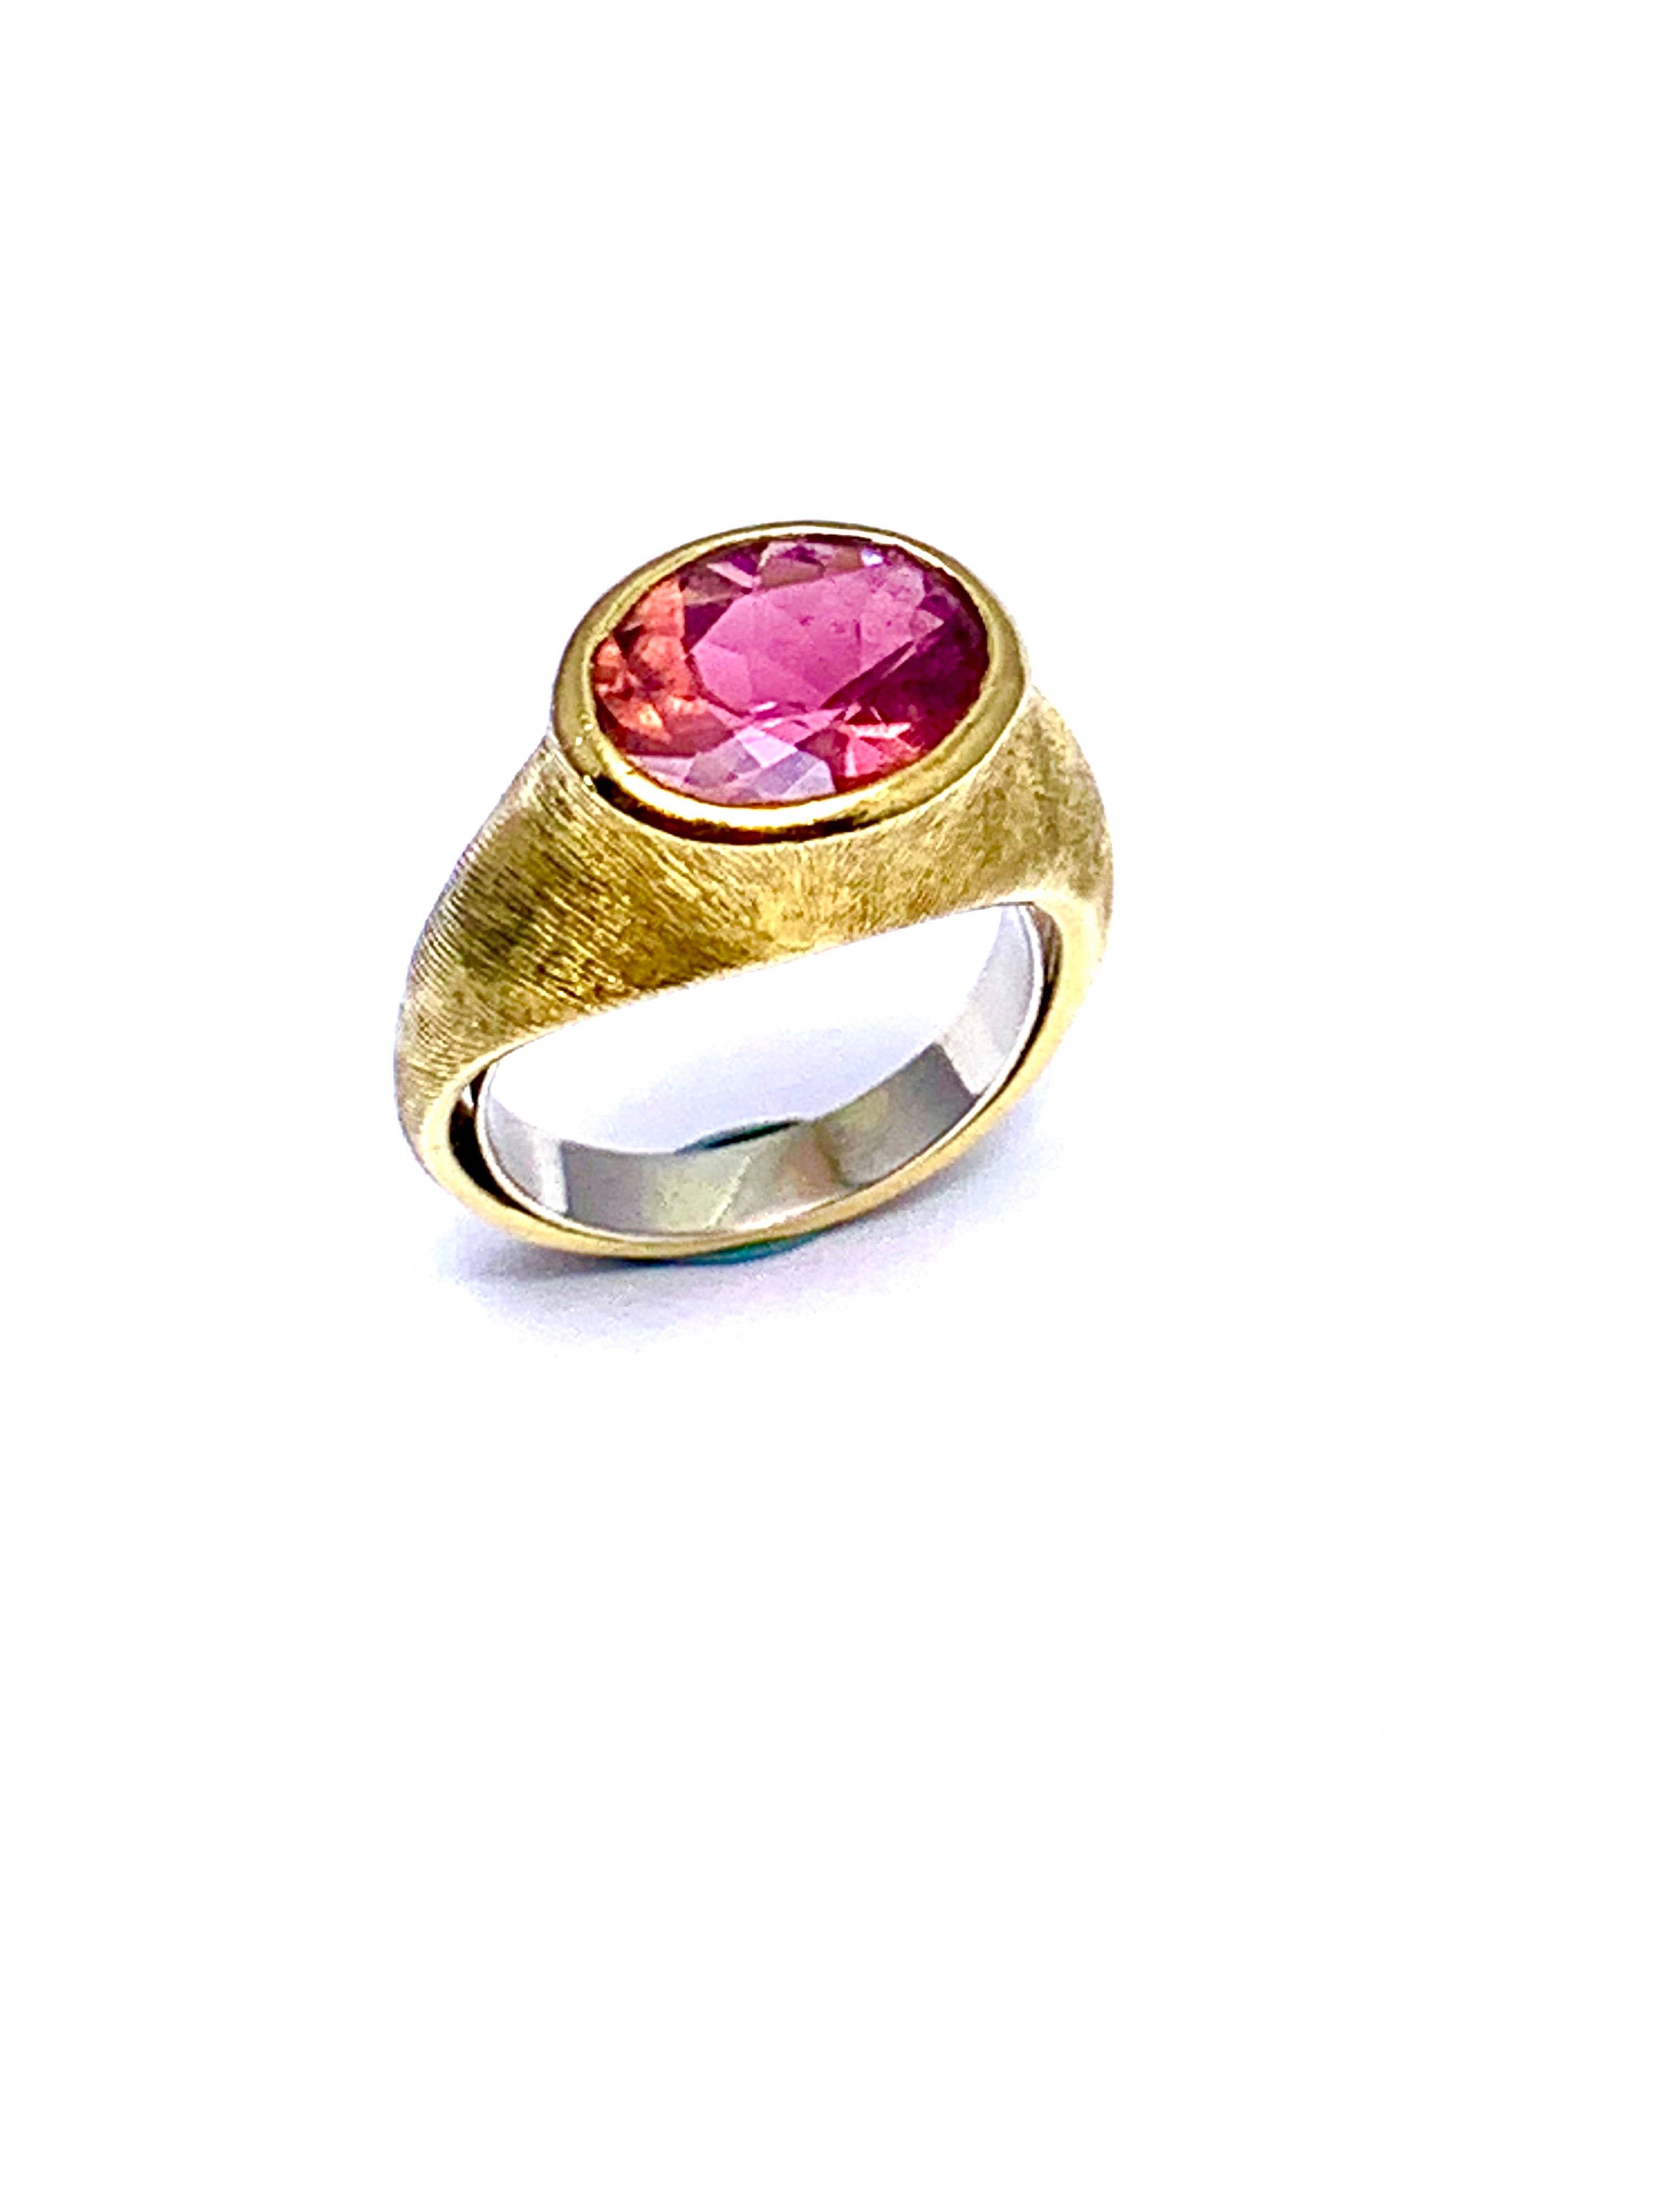 A beautiful Pink Tourmaline ring designed by Burle Marx. The 3.57 carat faceted oval Pink Tourmaline displays a light pink hue, bezel set in an 18 karat yellow gold abstarct design ring. The inside shank is signed 